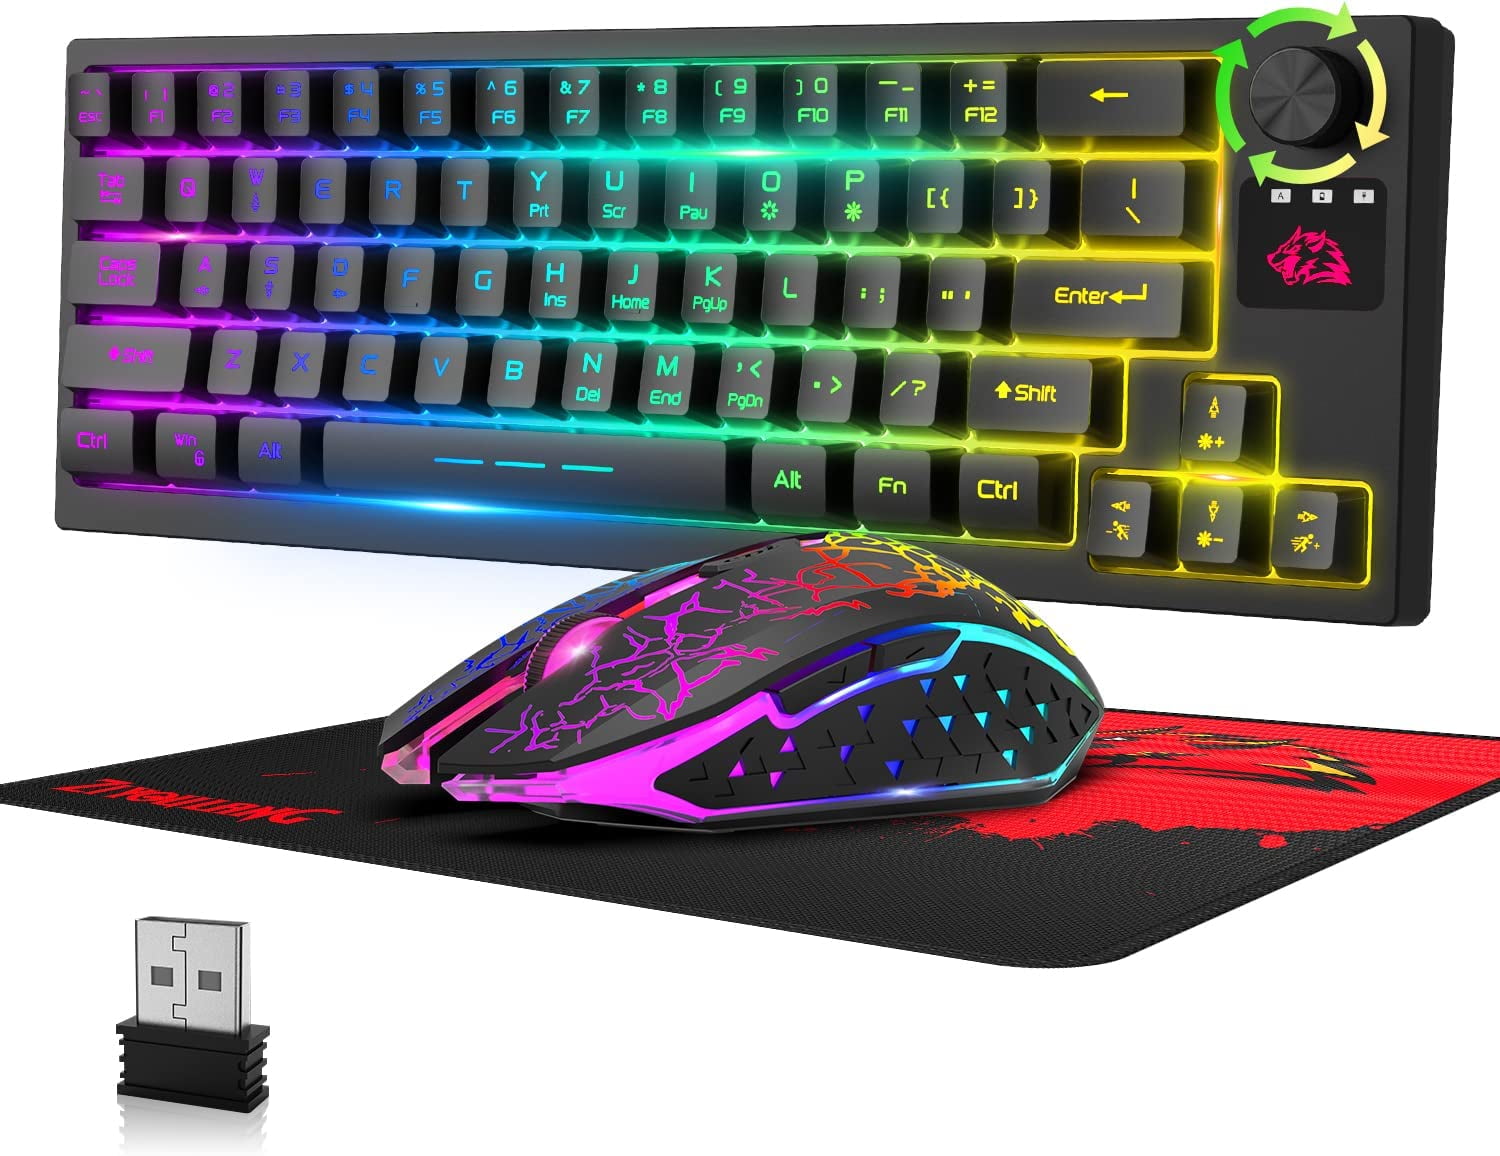 Wireless Gaming Keyboard and Mouse Combo,12 RGB Backlight Rechargeable  4000mAh Battery,Mechanical Feel Anti-ghosting Keyboard and RGB Wireless  Gaming